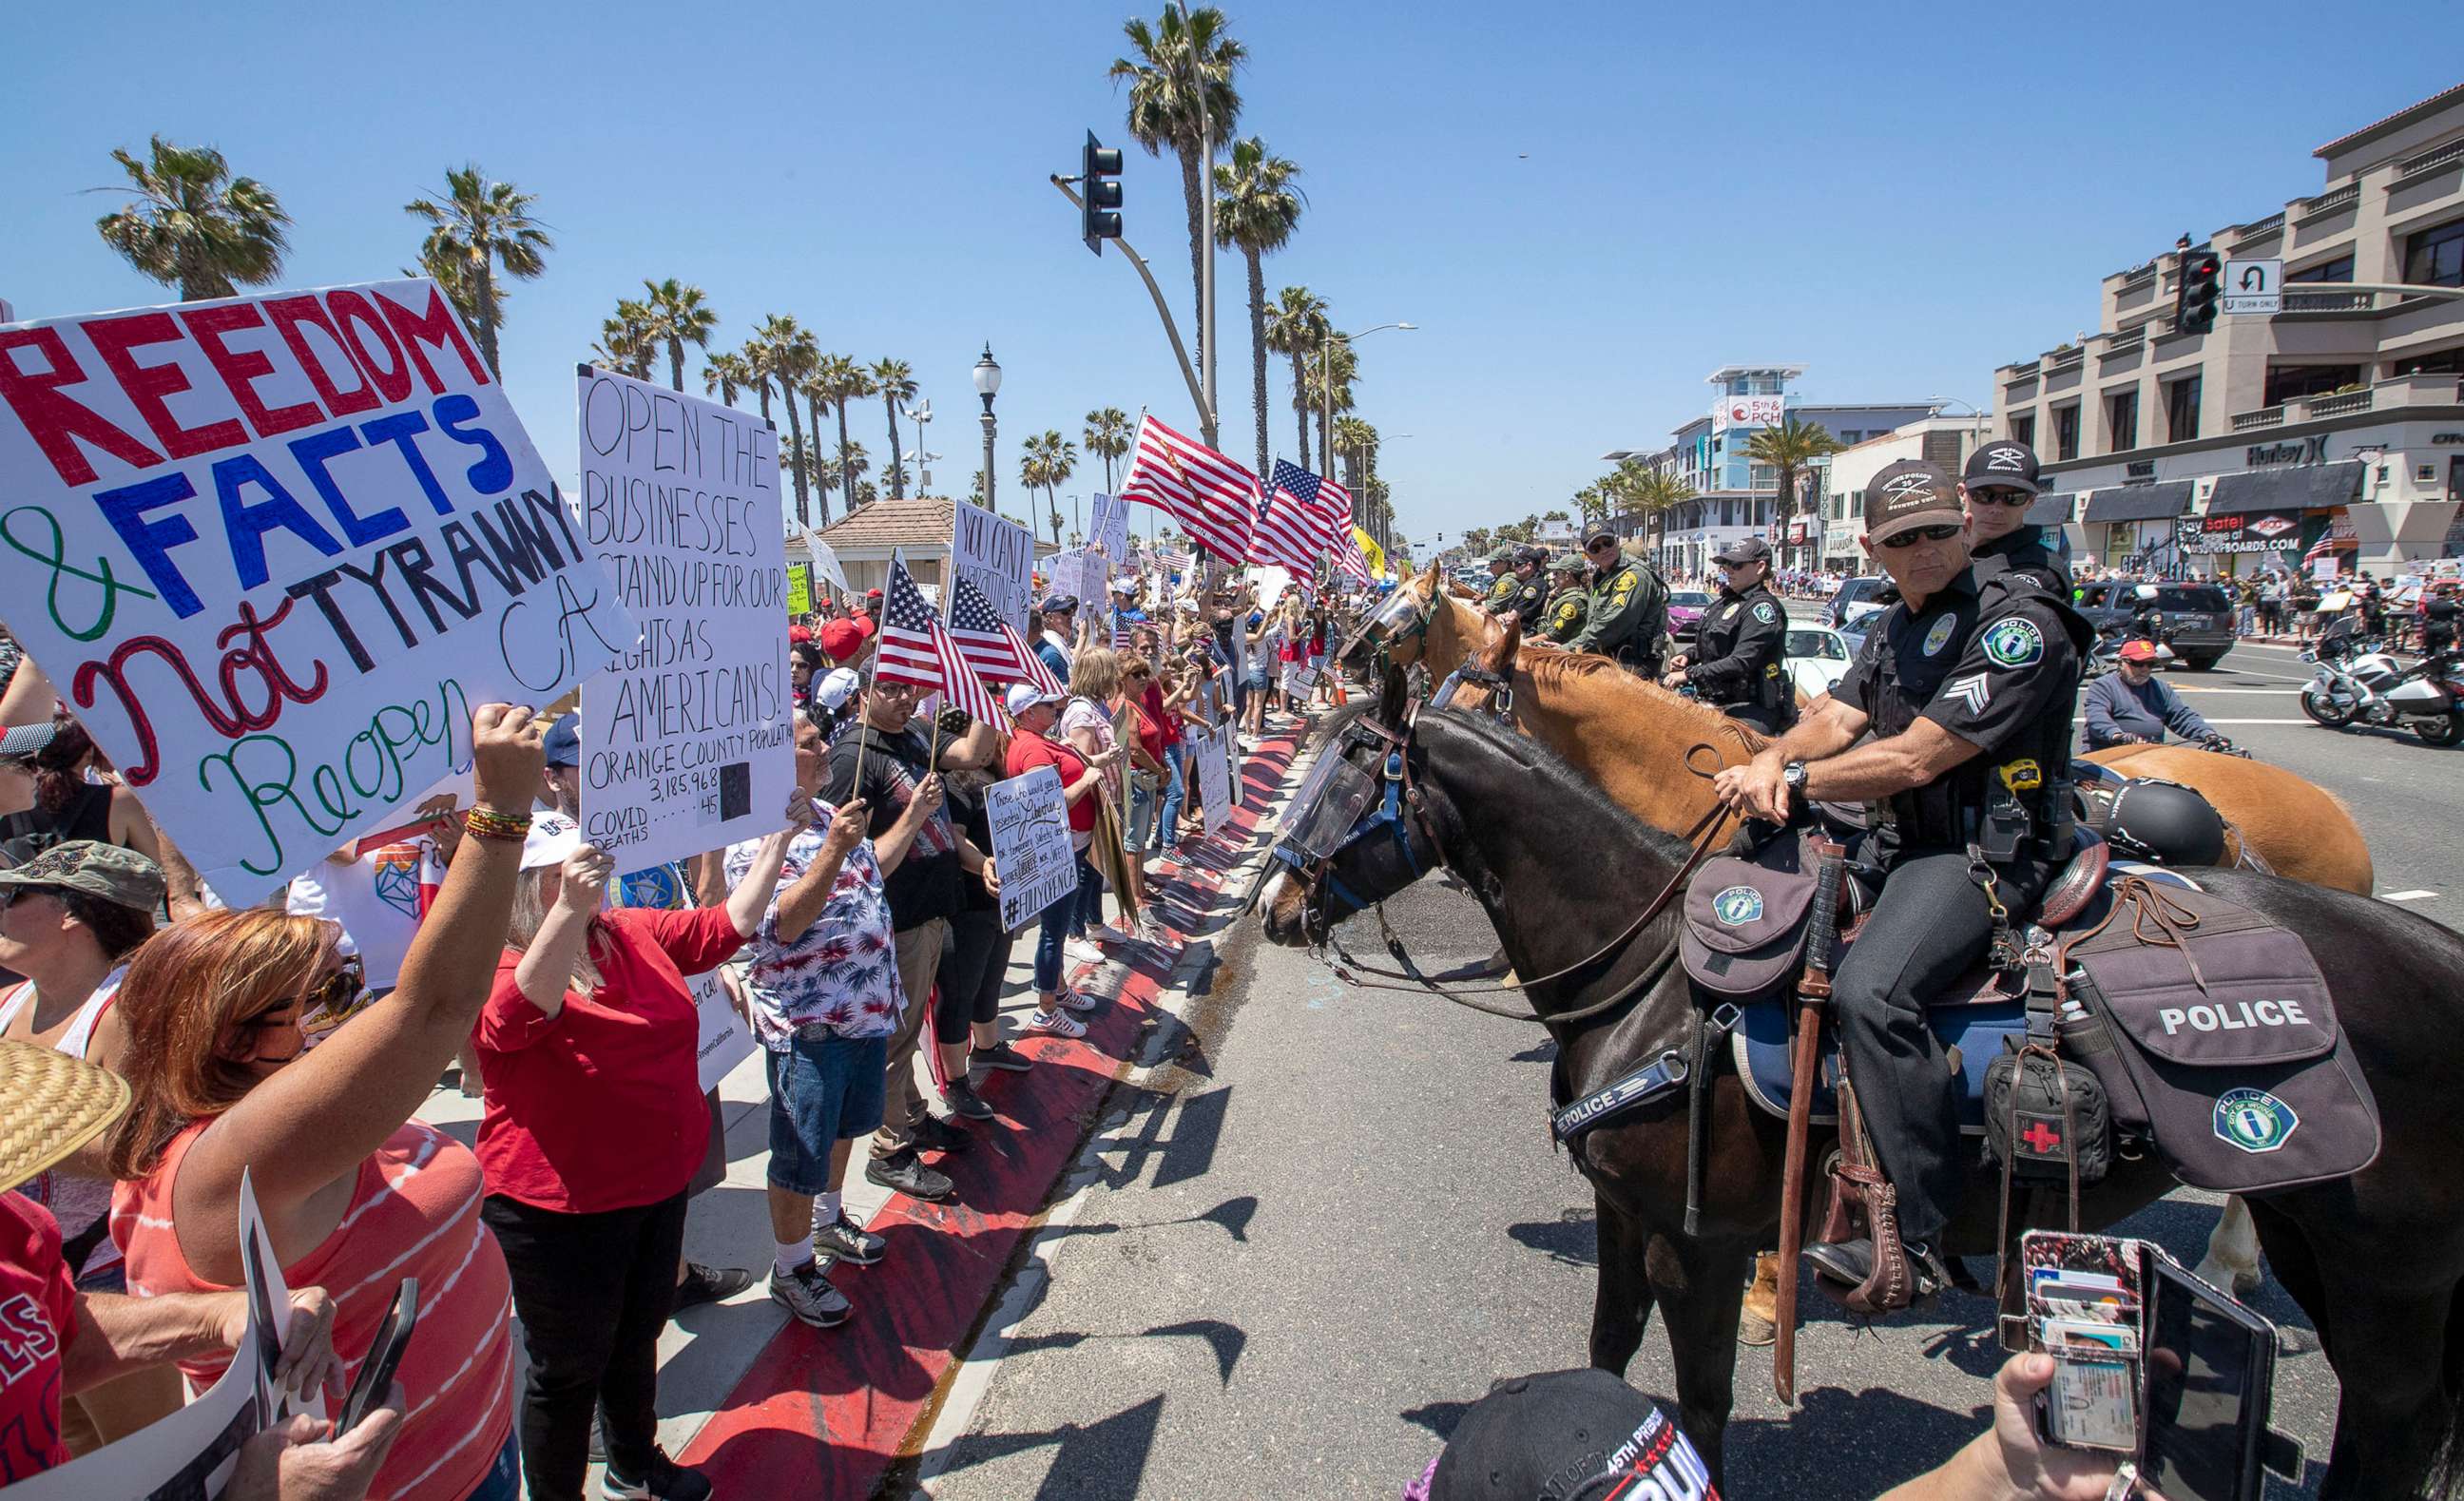 PHOTO: Mounted police line up to keep protesters on the sidewalk during a rally to call on California Governor Gavin Newsom to relax the state's stay-at-home orders under COVID-19 in Huntington Beach, Calif., May 1, 2020.